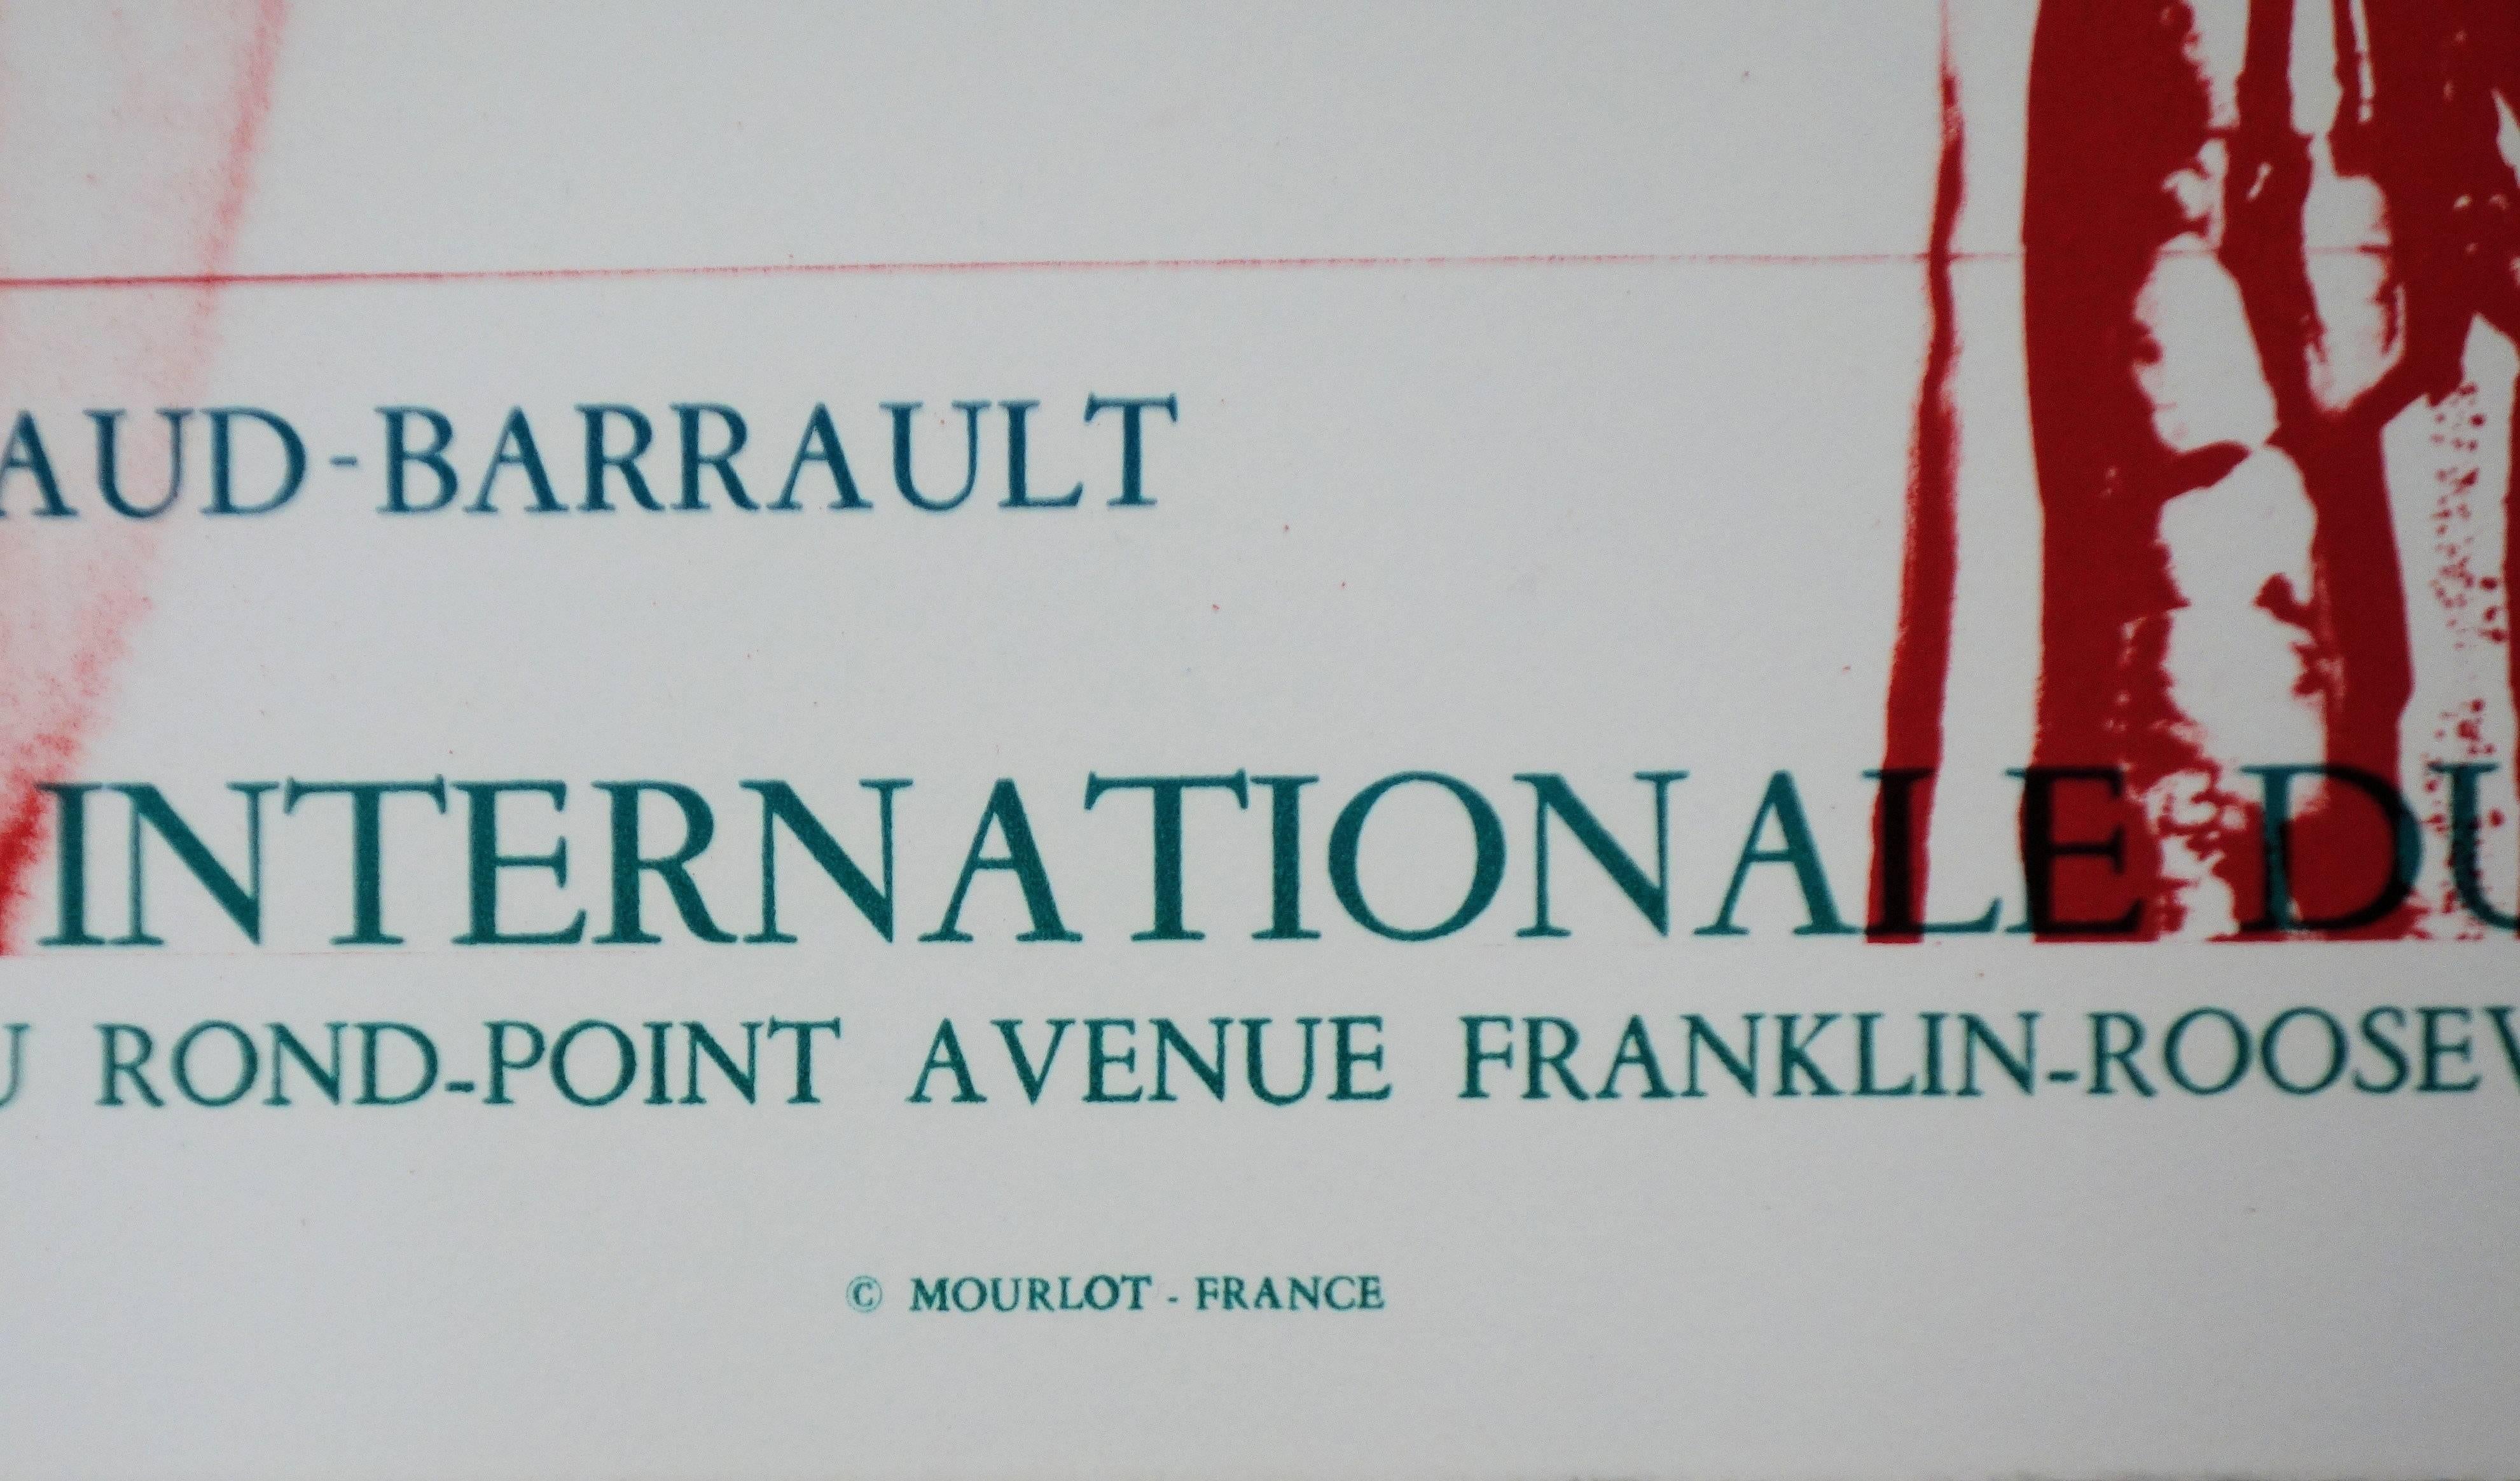 Paul JENKINS
MIT International Theater

Original lithograph
Printed signature in the plate
Printed in Mourlot workshop c. 1980
Rare proof on Arches vellum 
76 x 54 cm (c. 30 x 21 in)

Excellent condition